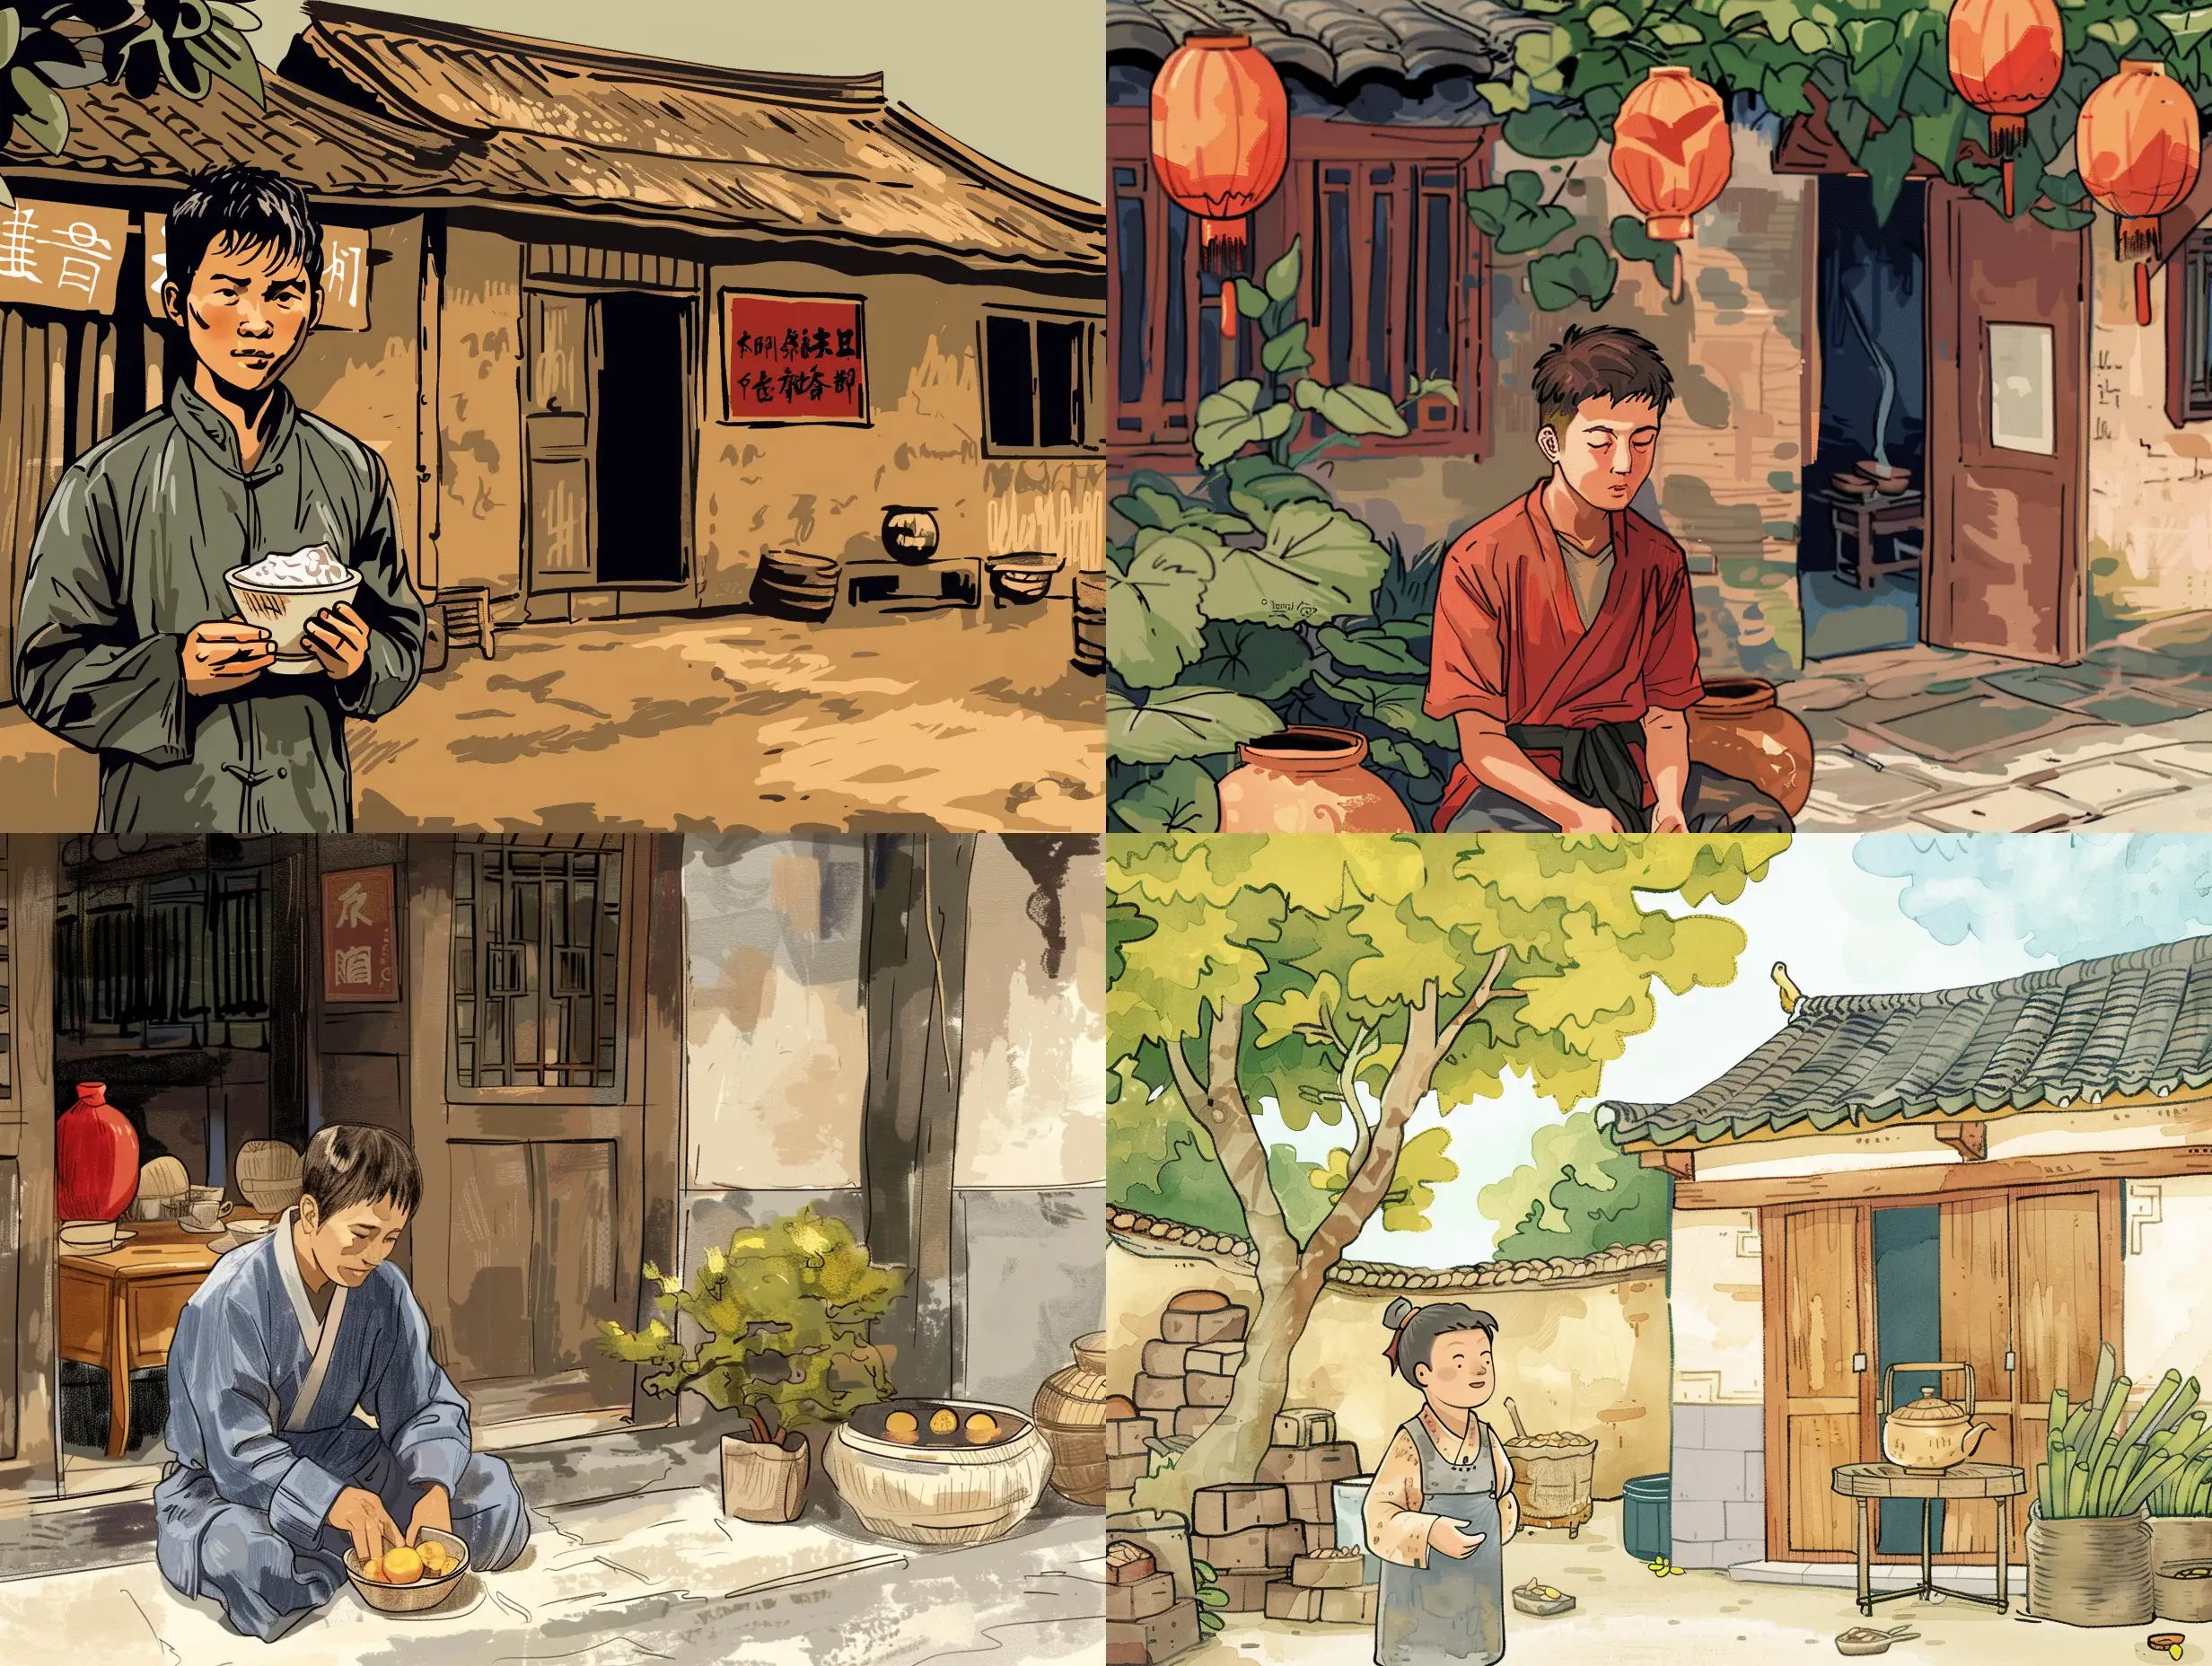 Young-Chinese-Man-at-Teahouse-Illustration-of-a-Poignant-Tale